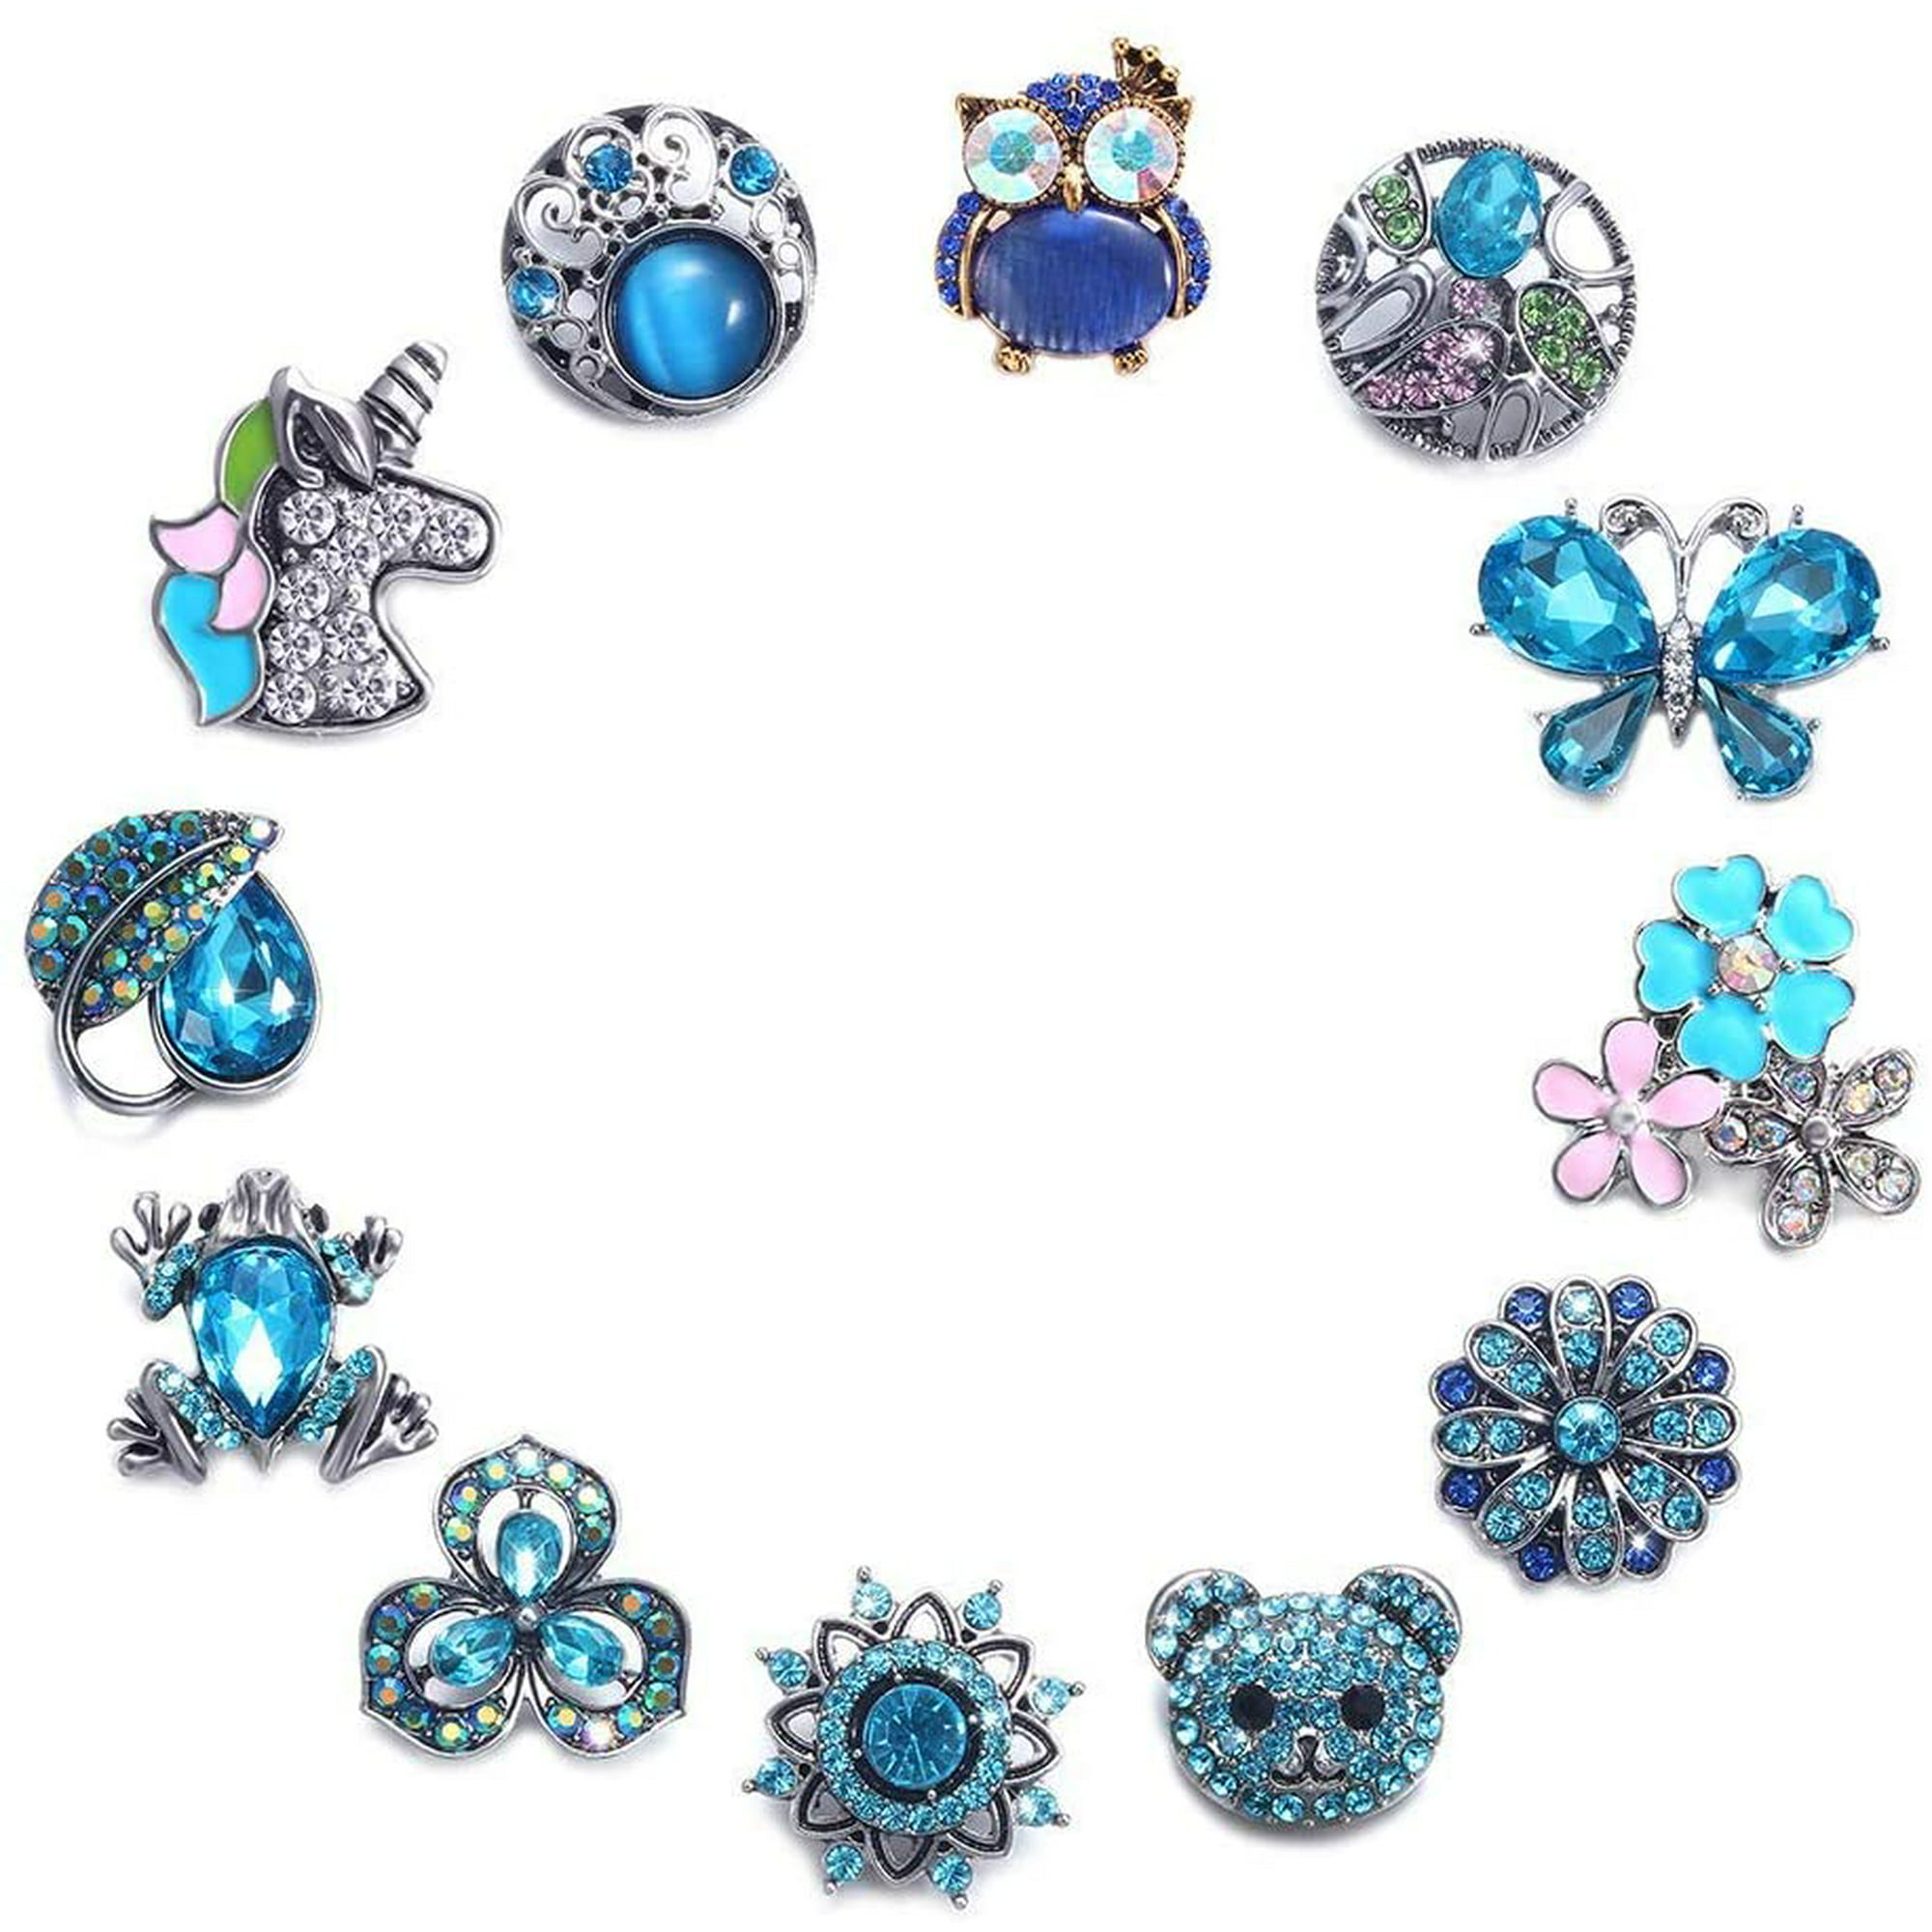 12 PCS Snap Jewelry Snaps 18mm Snap on Jewelry Charms with Bracelet Set, Snaps Charm Button for Snap Jewelry Necklace Bracelet | Walmart Canada